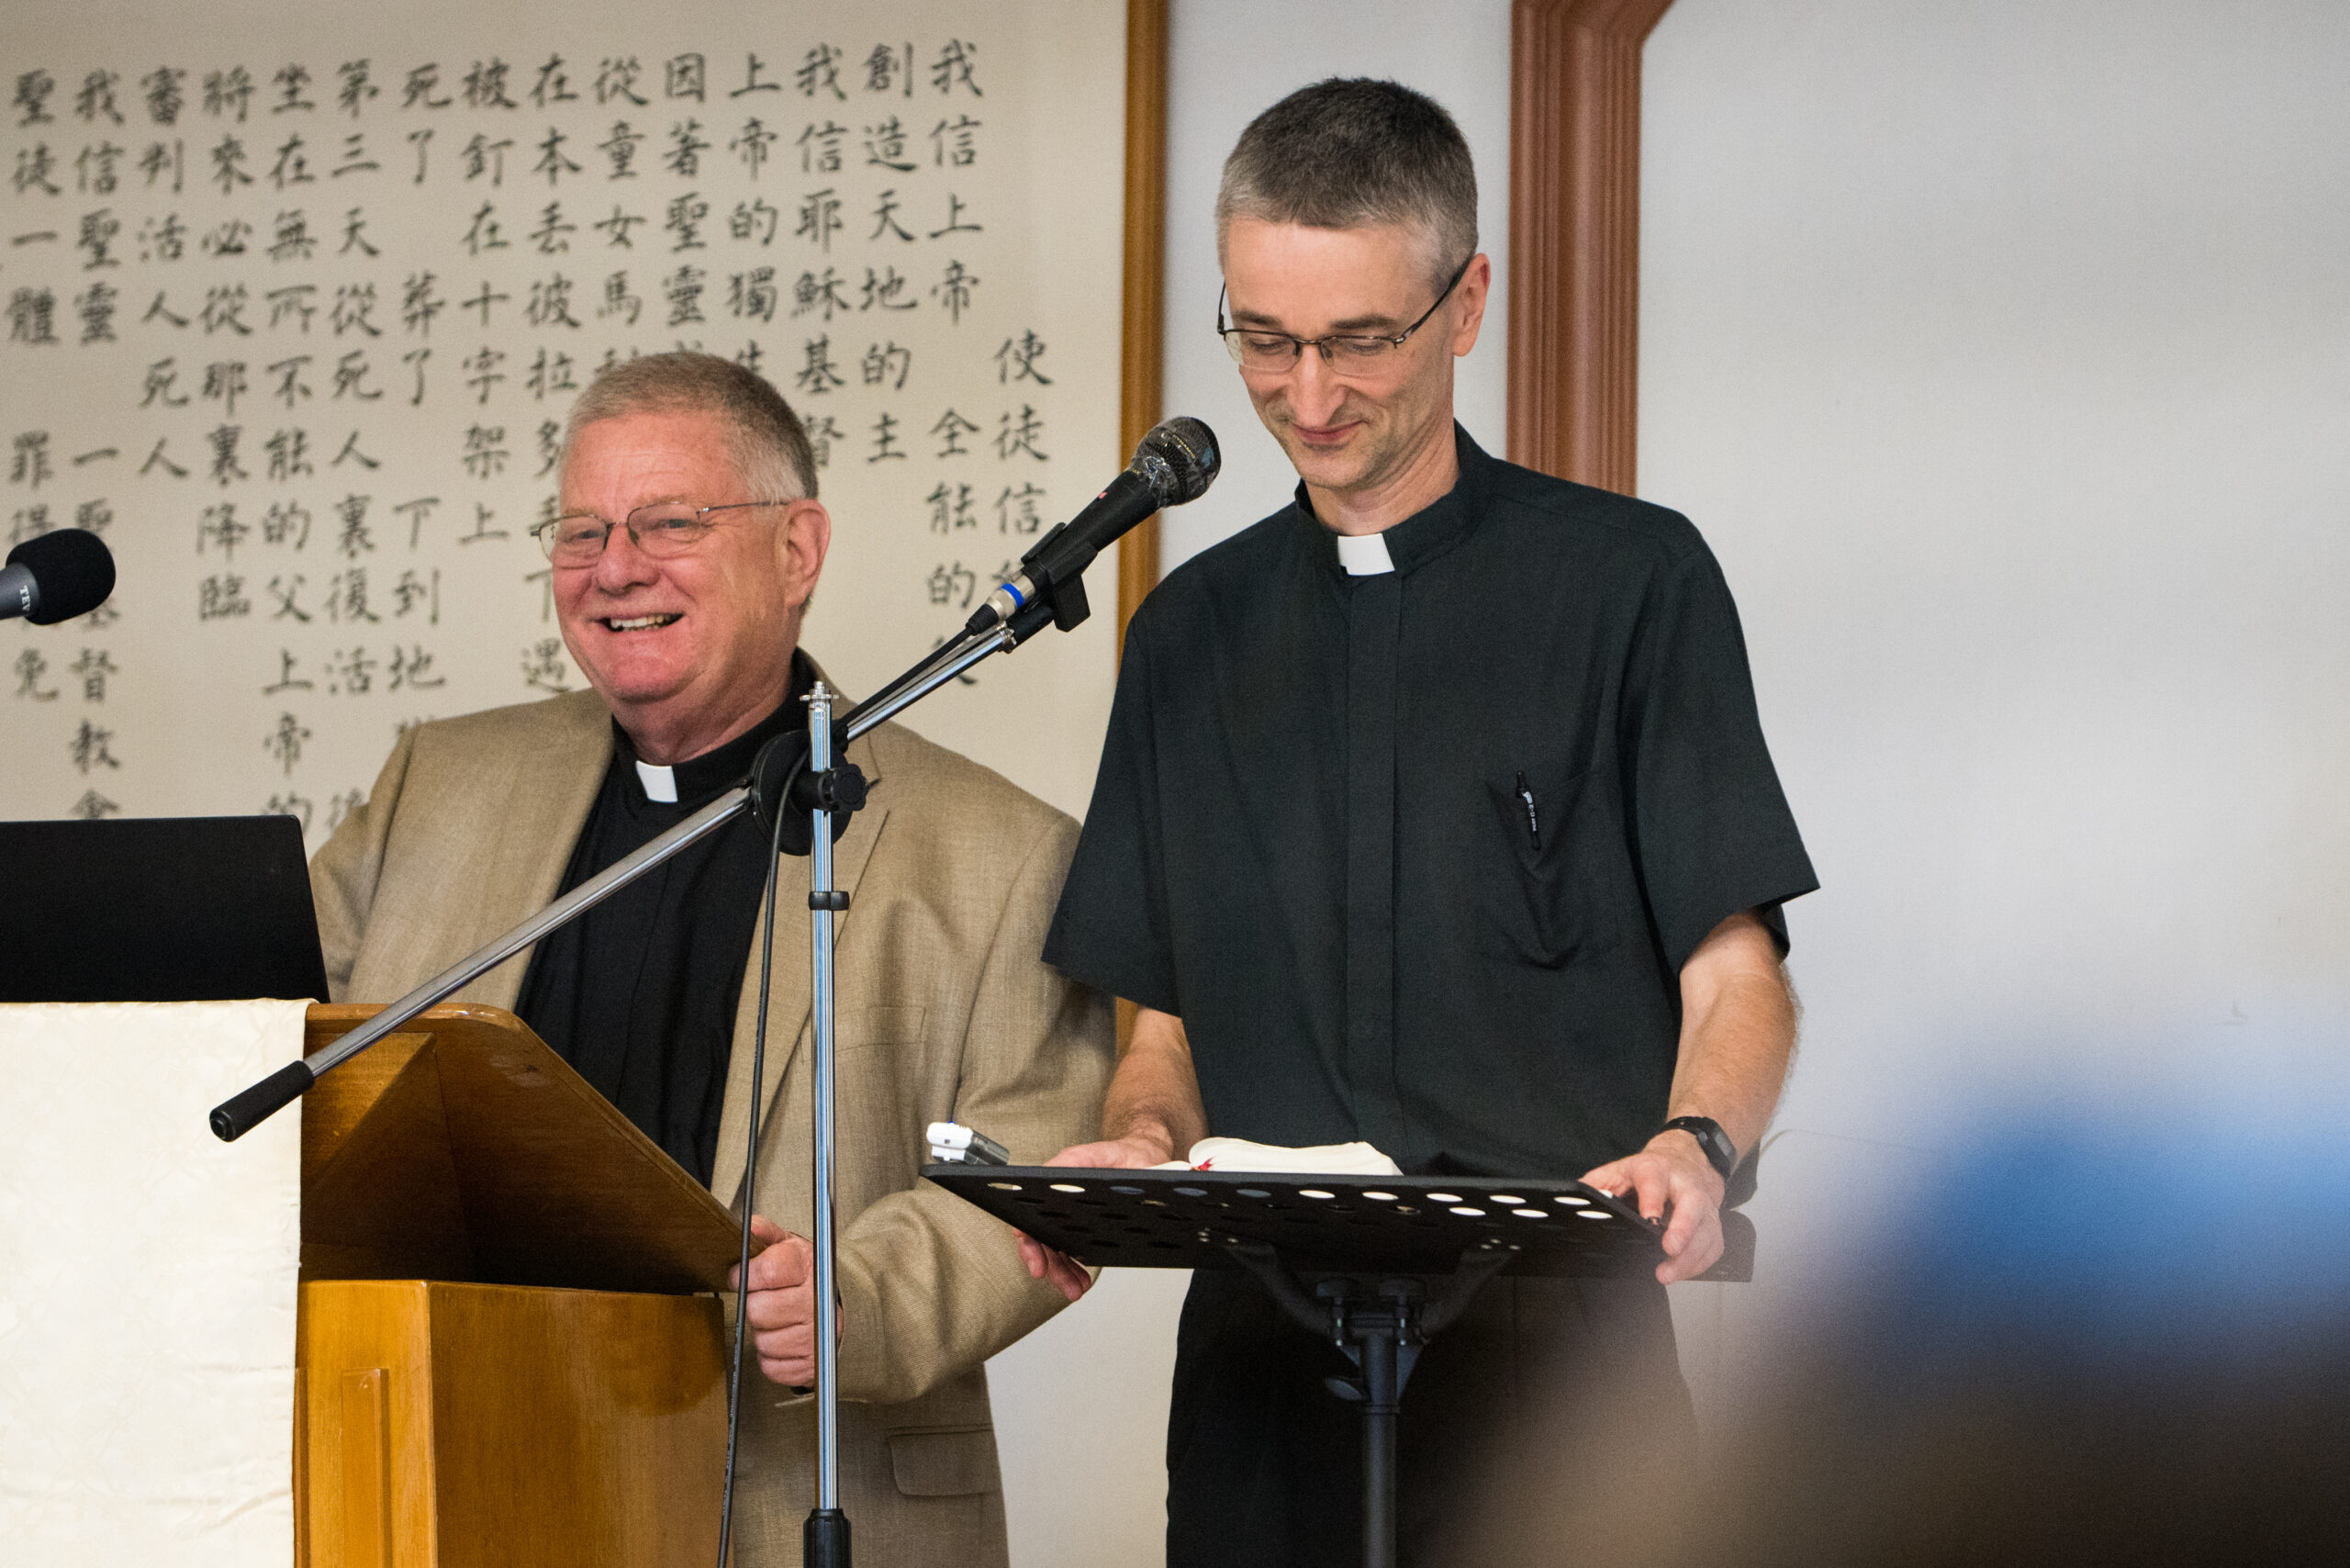 Rev. John T. Pless and Rev. Dr. Michael Paul at Salvation Lutheran Church in Chiayi, Taiwan, presenting on Luther's Small Catechism. LCMS COMMUNICATIONS / Johanna Heidorn